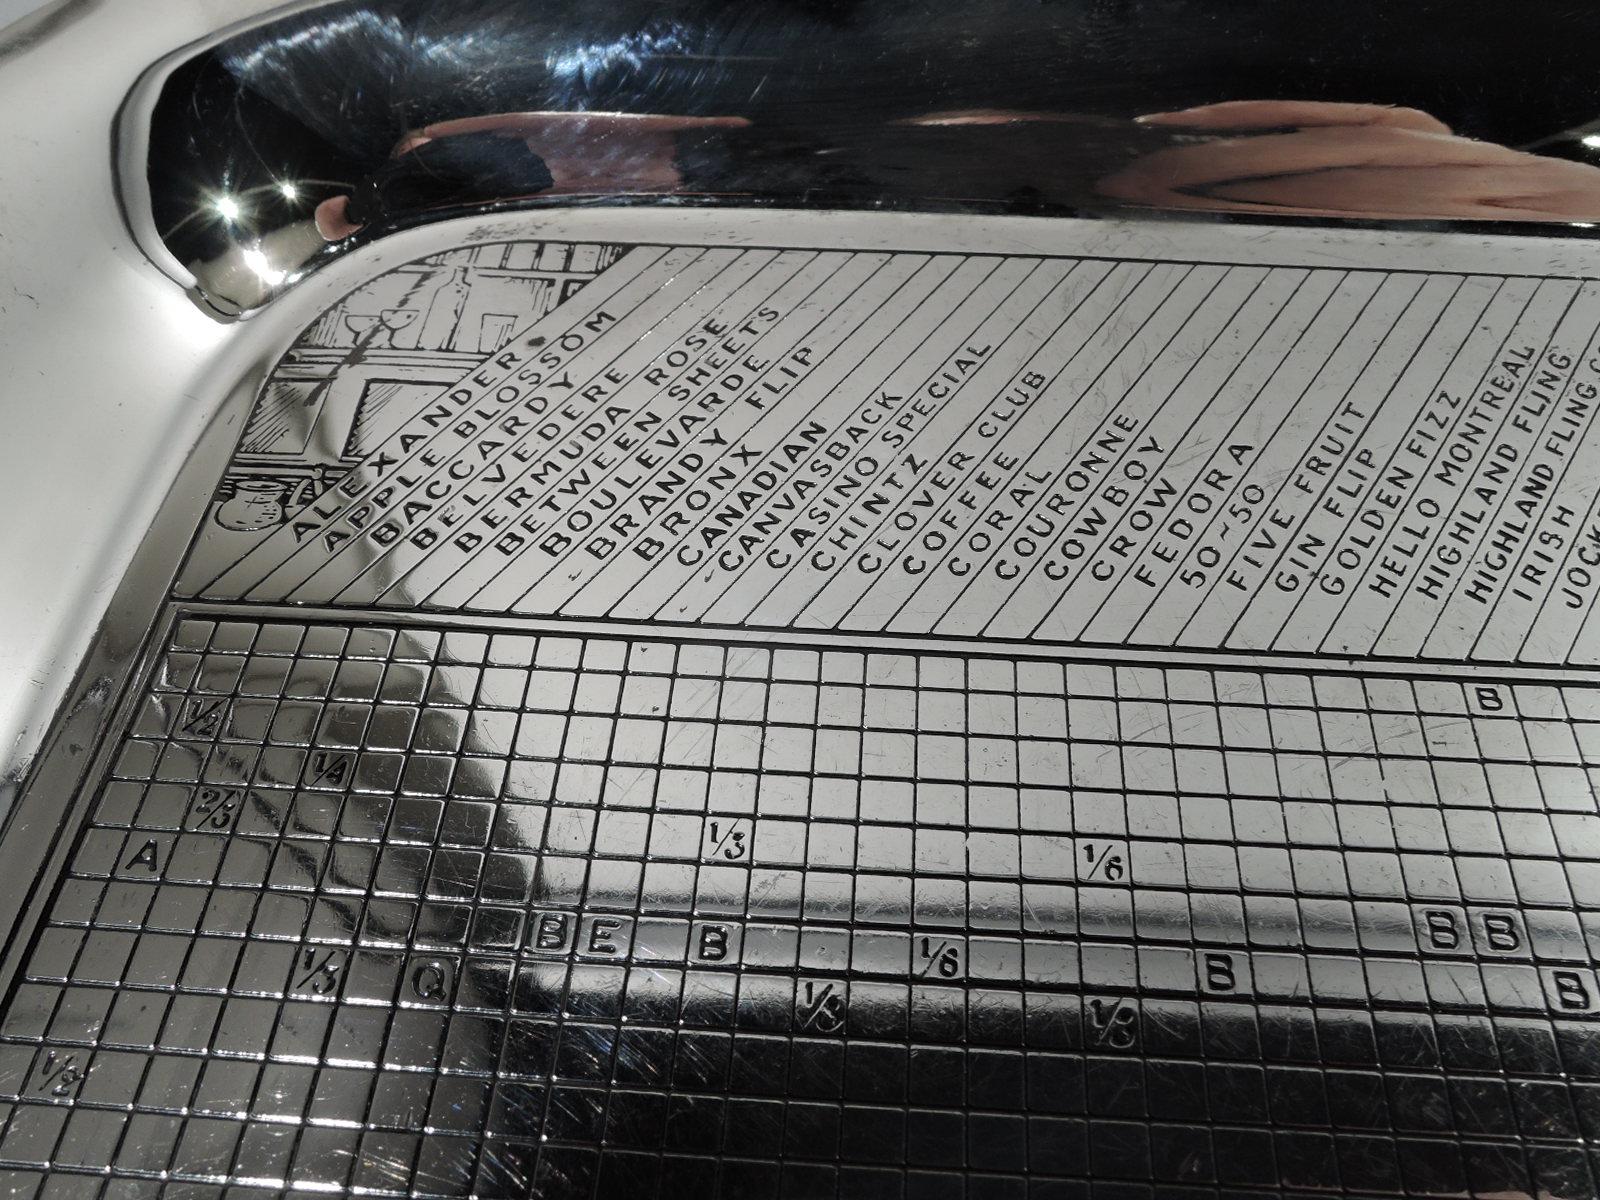 Mid-Century Modern sterling silver bar tray. Made by Gorham in Providence. Square with curved corners, plain and tapering sides, and scalloped corners. Well has engraved drinks-mixing chart in form of grid with ingredients at right and measurements